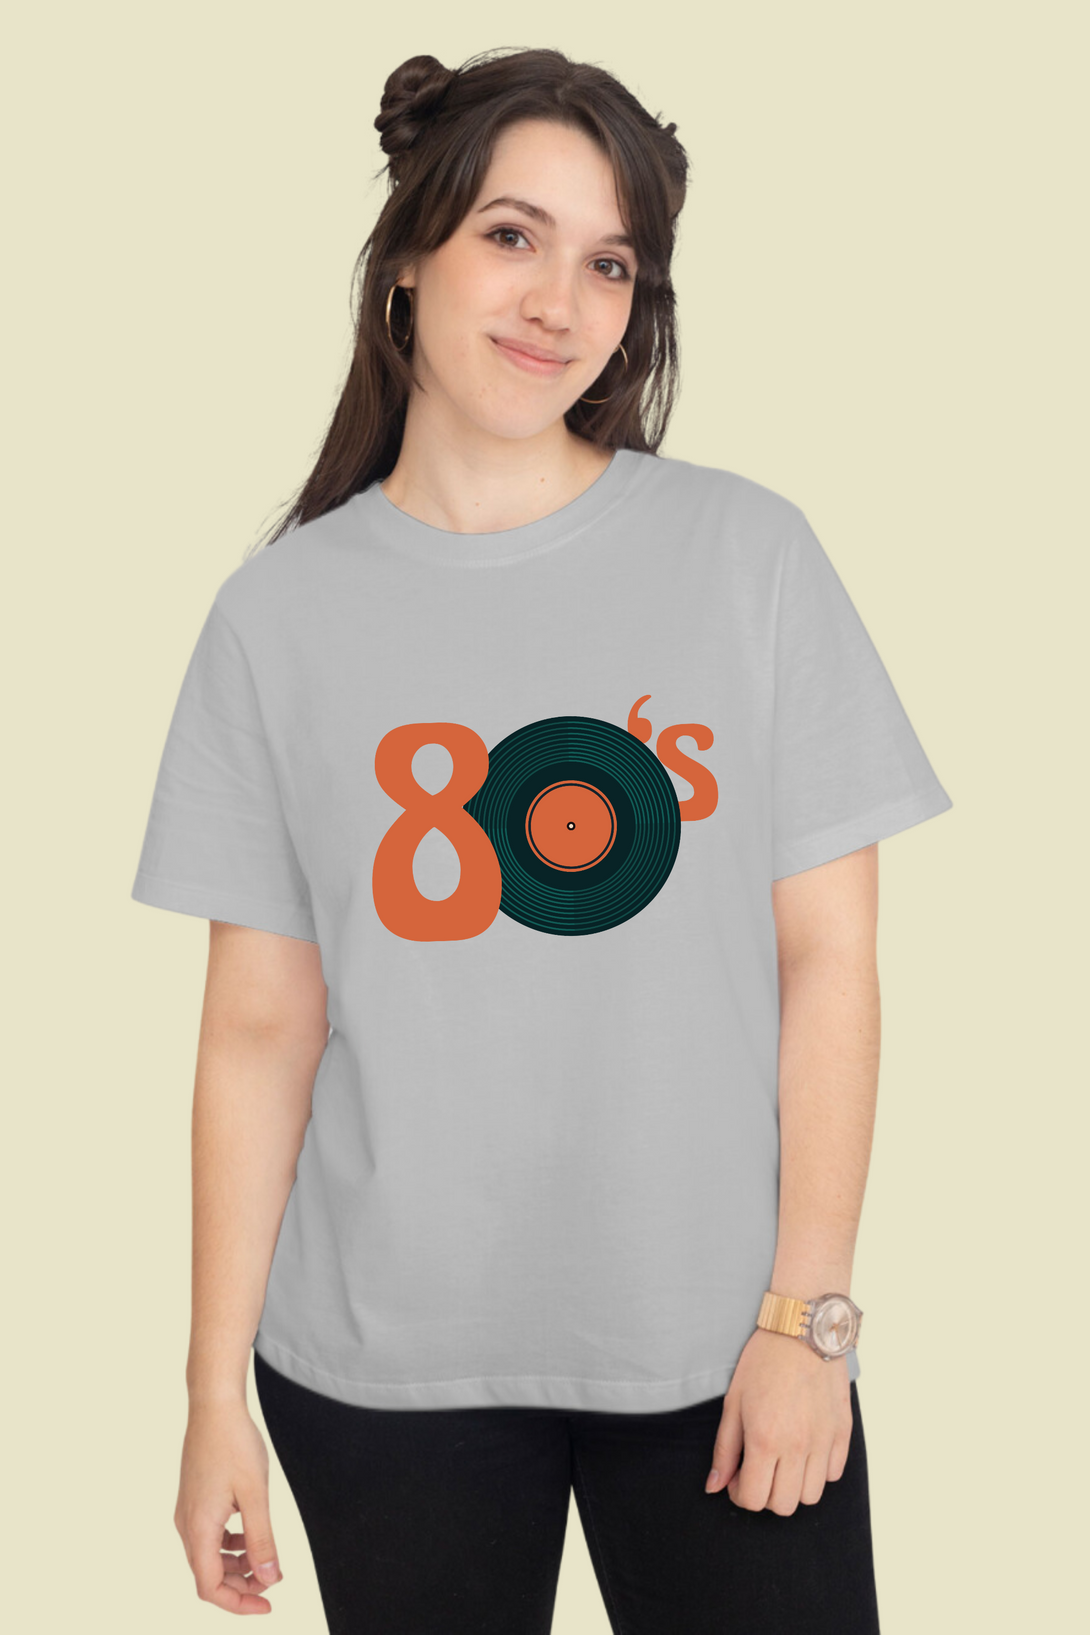 Retro Groove Printed T-Shirt For Women - WowWaves - 10